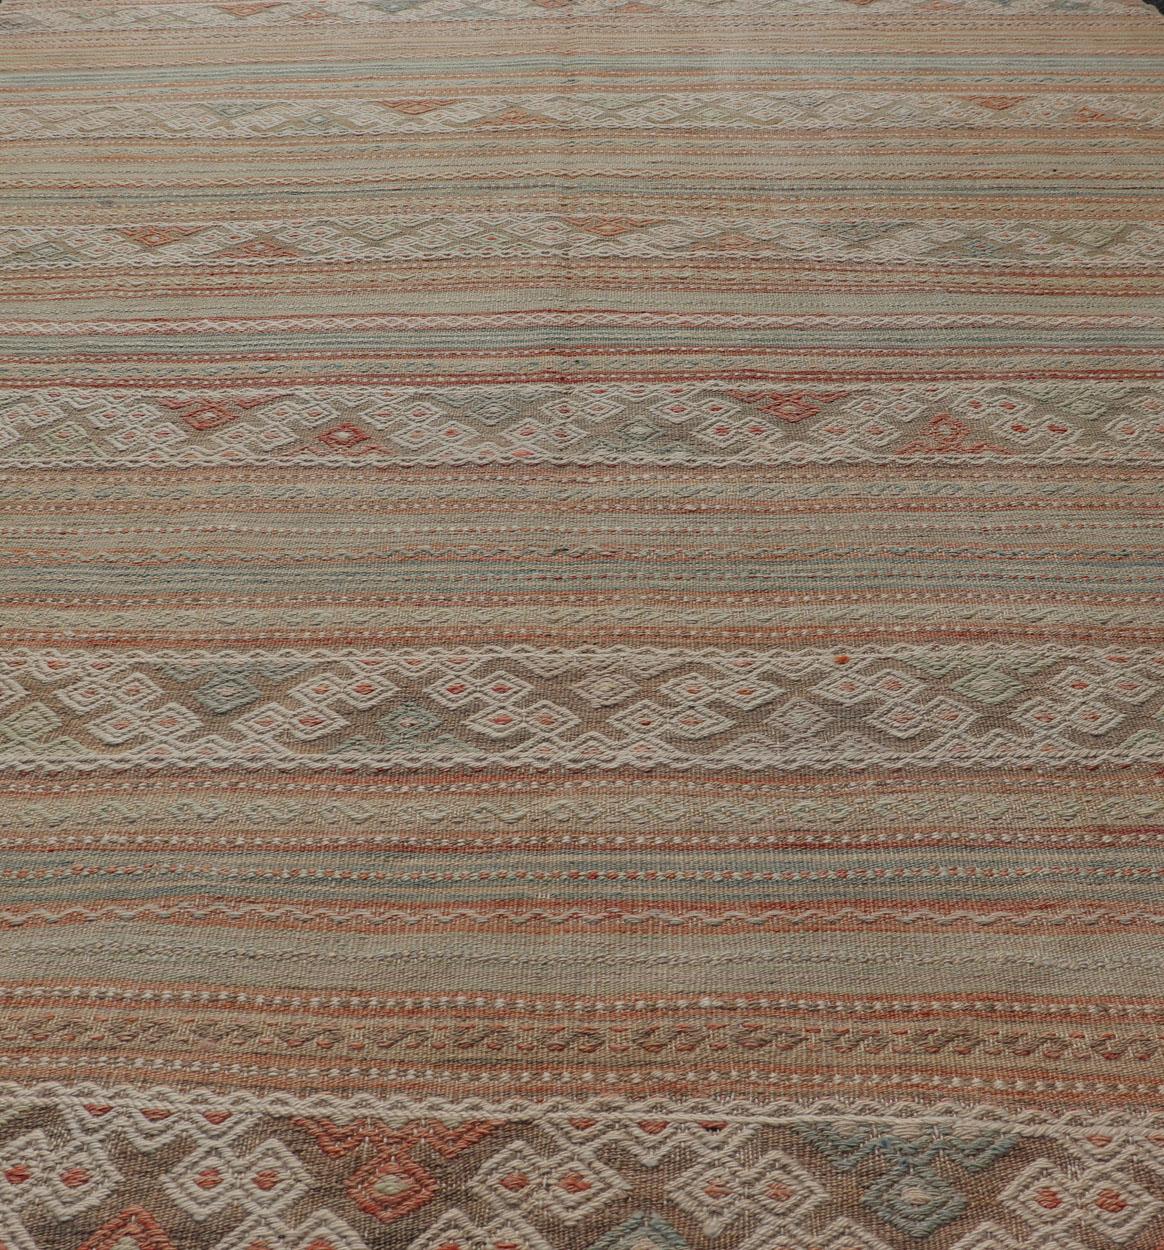 Colorful Vintage Embroidered Kilim with Stripes and Alternating Geometric Motifs For Sale 2